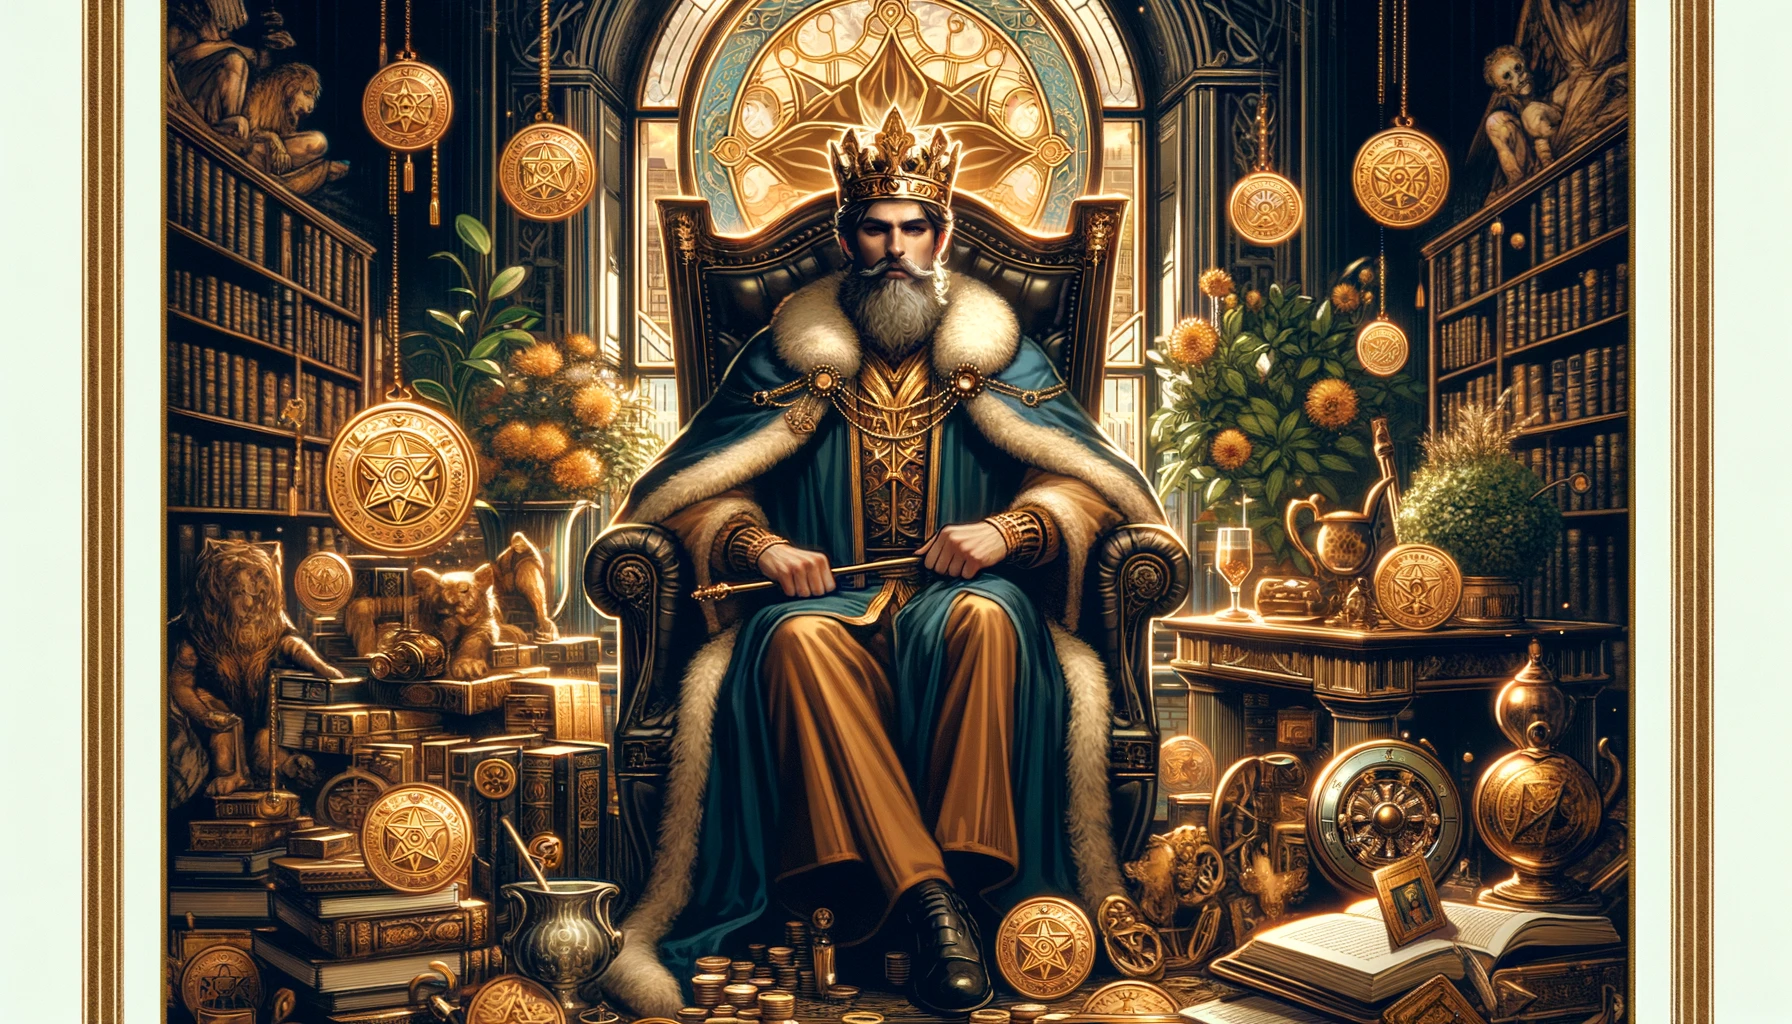 The image depicts the King of Pentacles seated on a lavish throne adorned with intricate carvings and embellishments, exuding an air of authority and confidence. He holds a pentacle in one hand, symbolizing his mastery over material wealth and abundance. Surrounding him are symbols of opulence, such as gold coins, jewels, and lush foliage, emphasizing his association with success and prosperity. This scene captures the essence of the King of Pentacles as a figure of wealth, reliability, and luxury.]